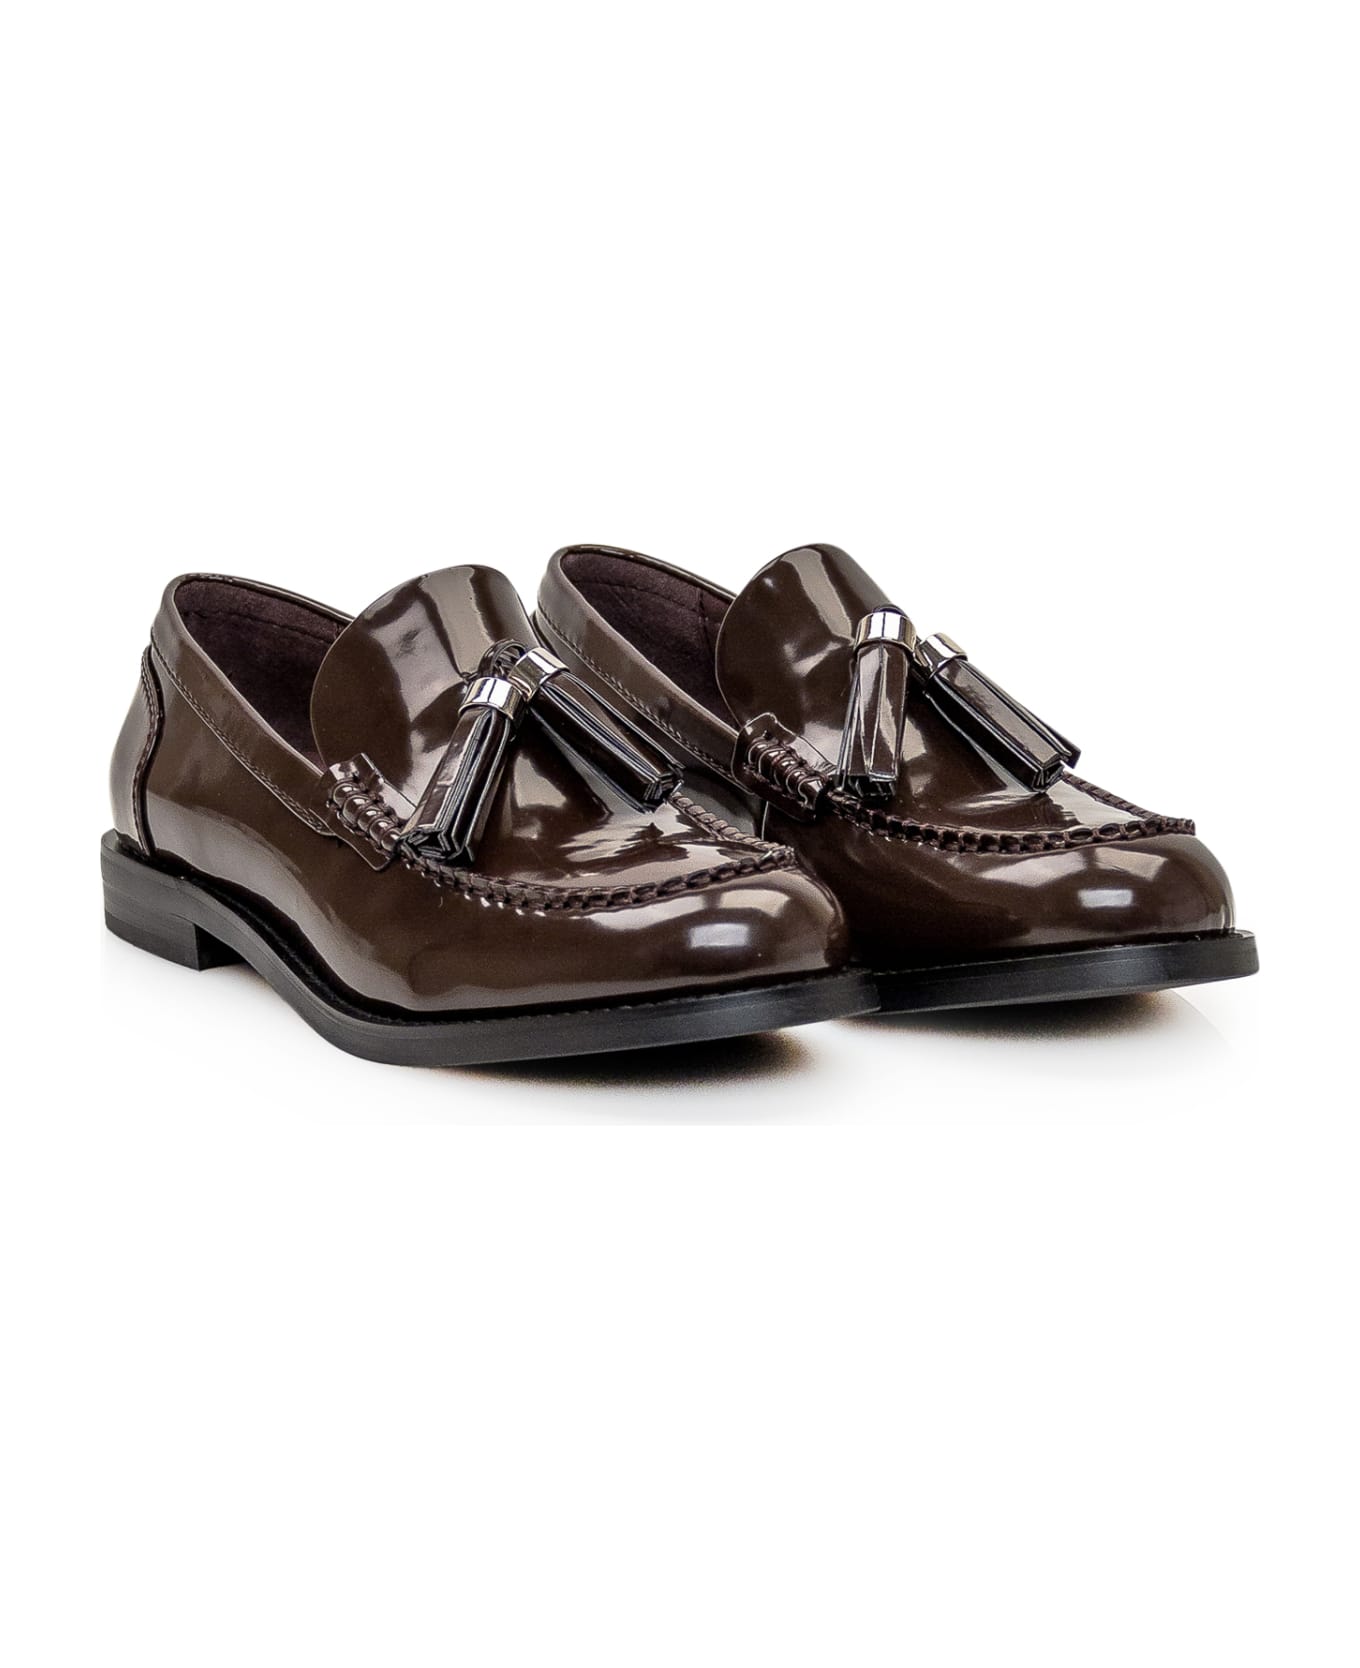 Jeffrey Campbell Lecture Loafer - BROWN フラットシューズ